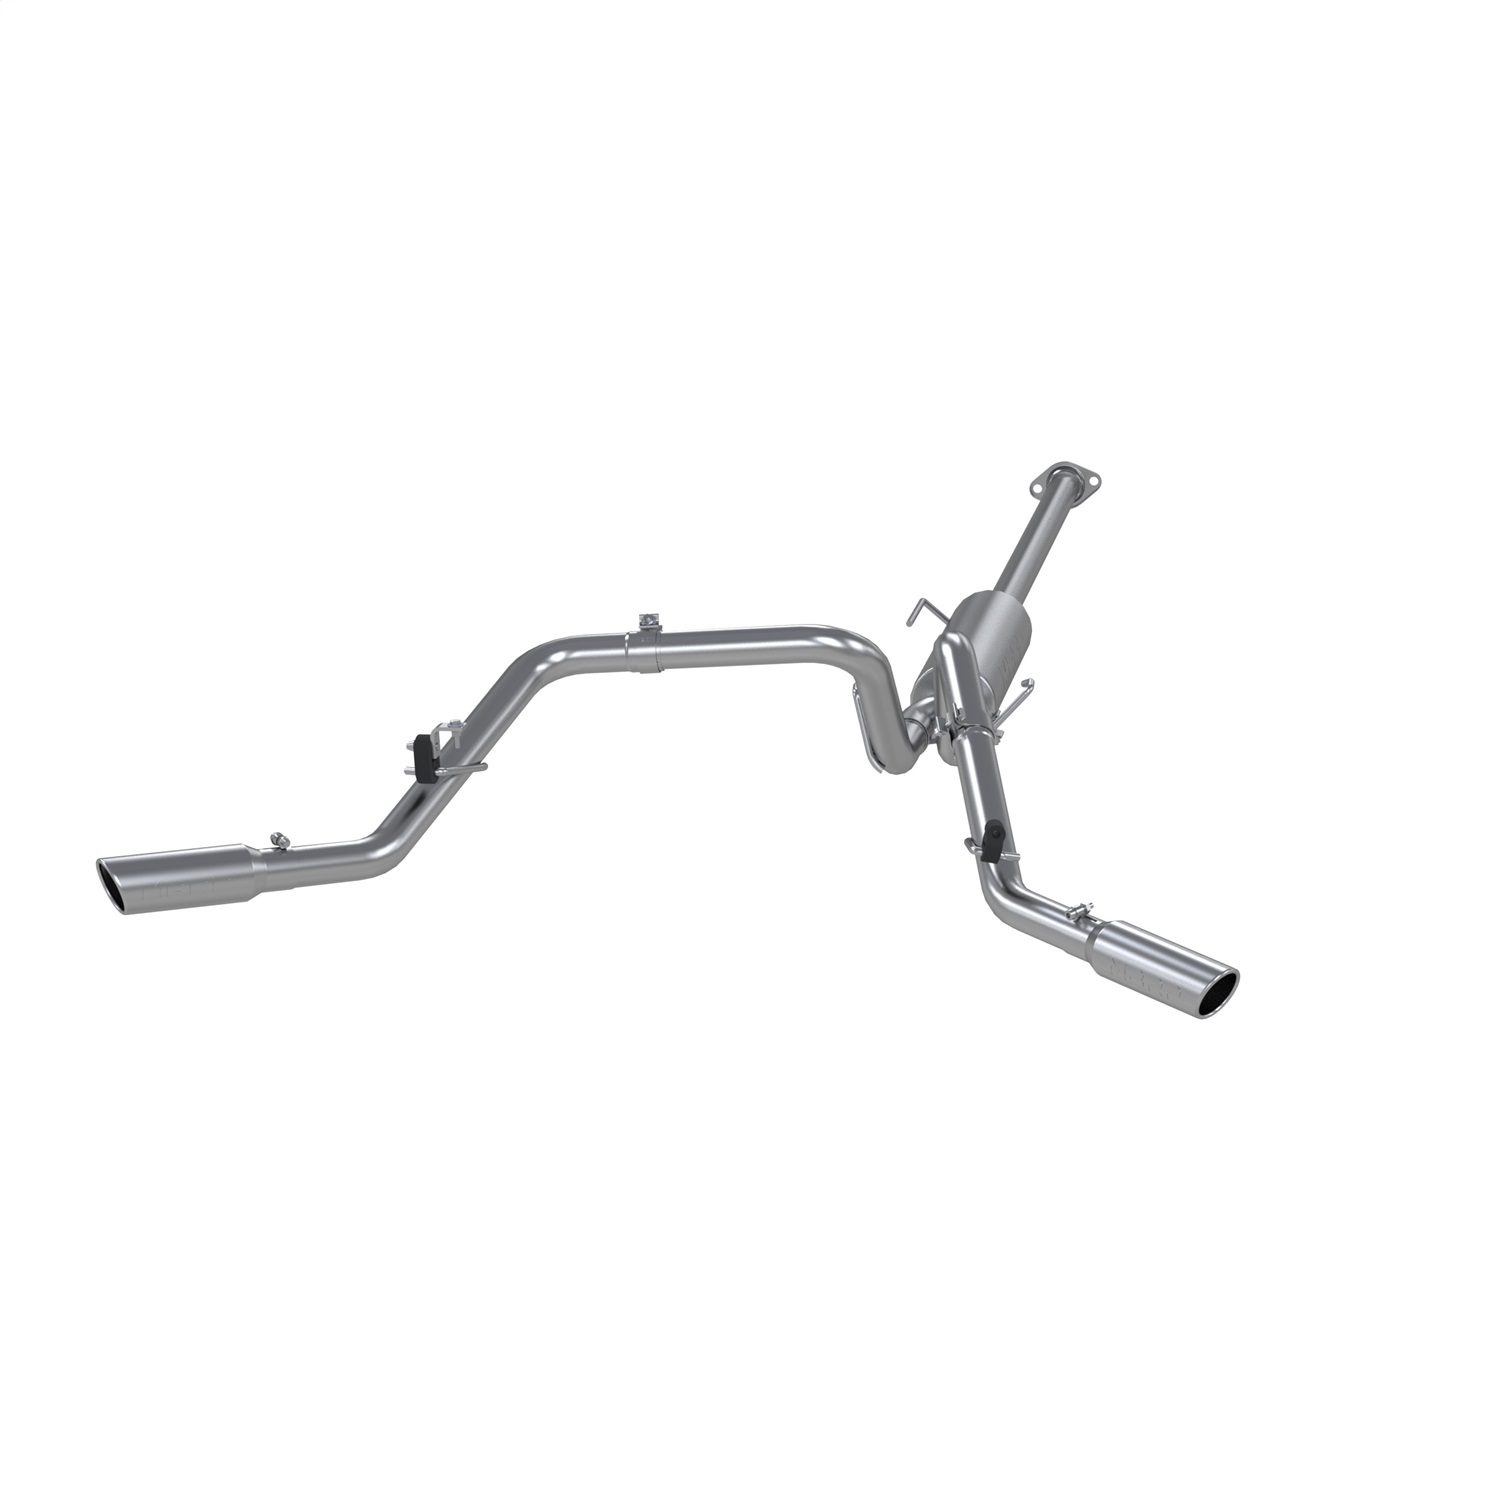 MBRP Exhaust S5328AL Armor Lite Cat Back Exhaust System Fits 05-15 Tacoma